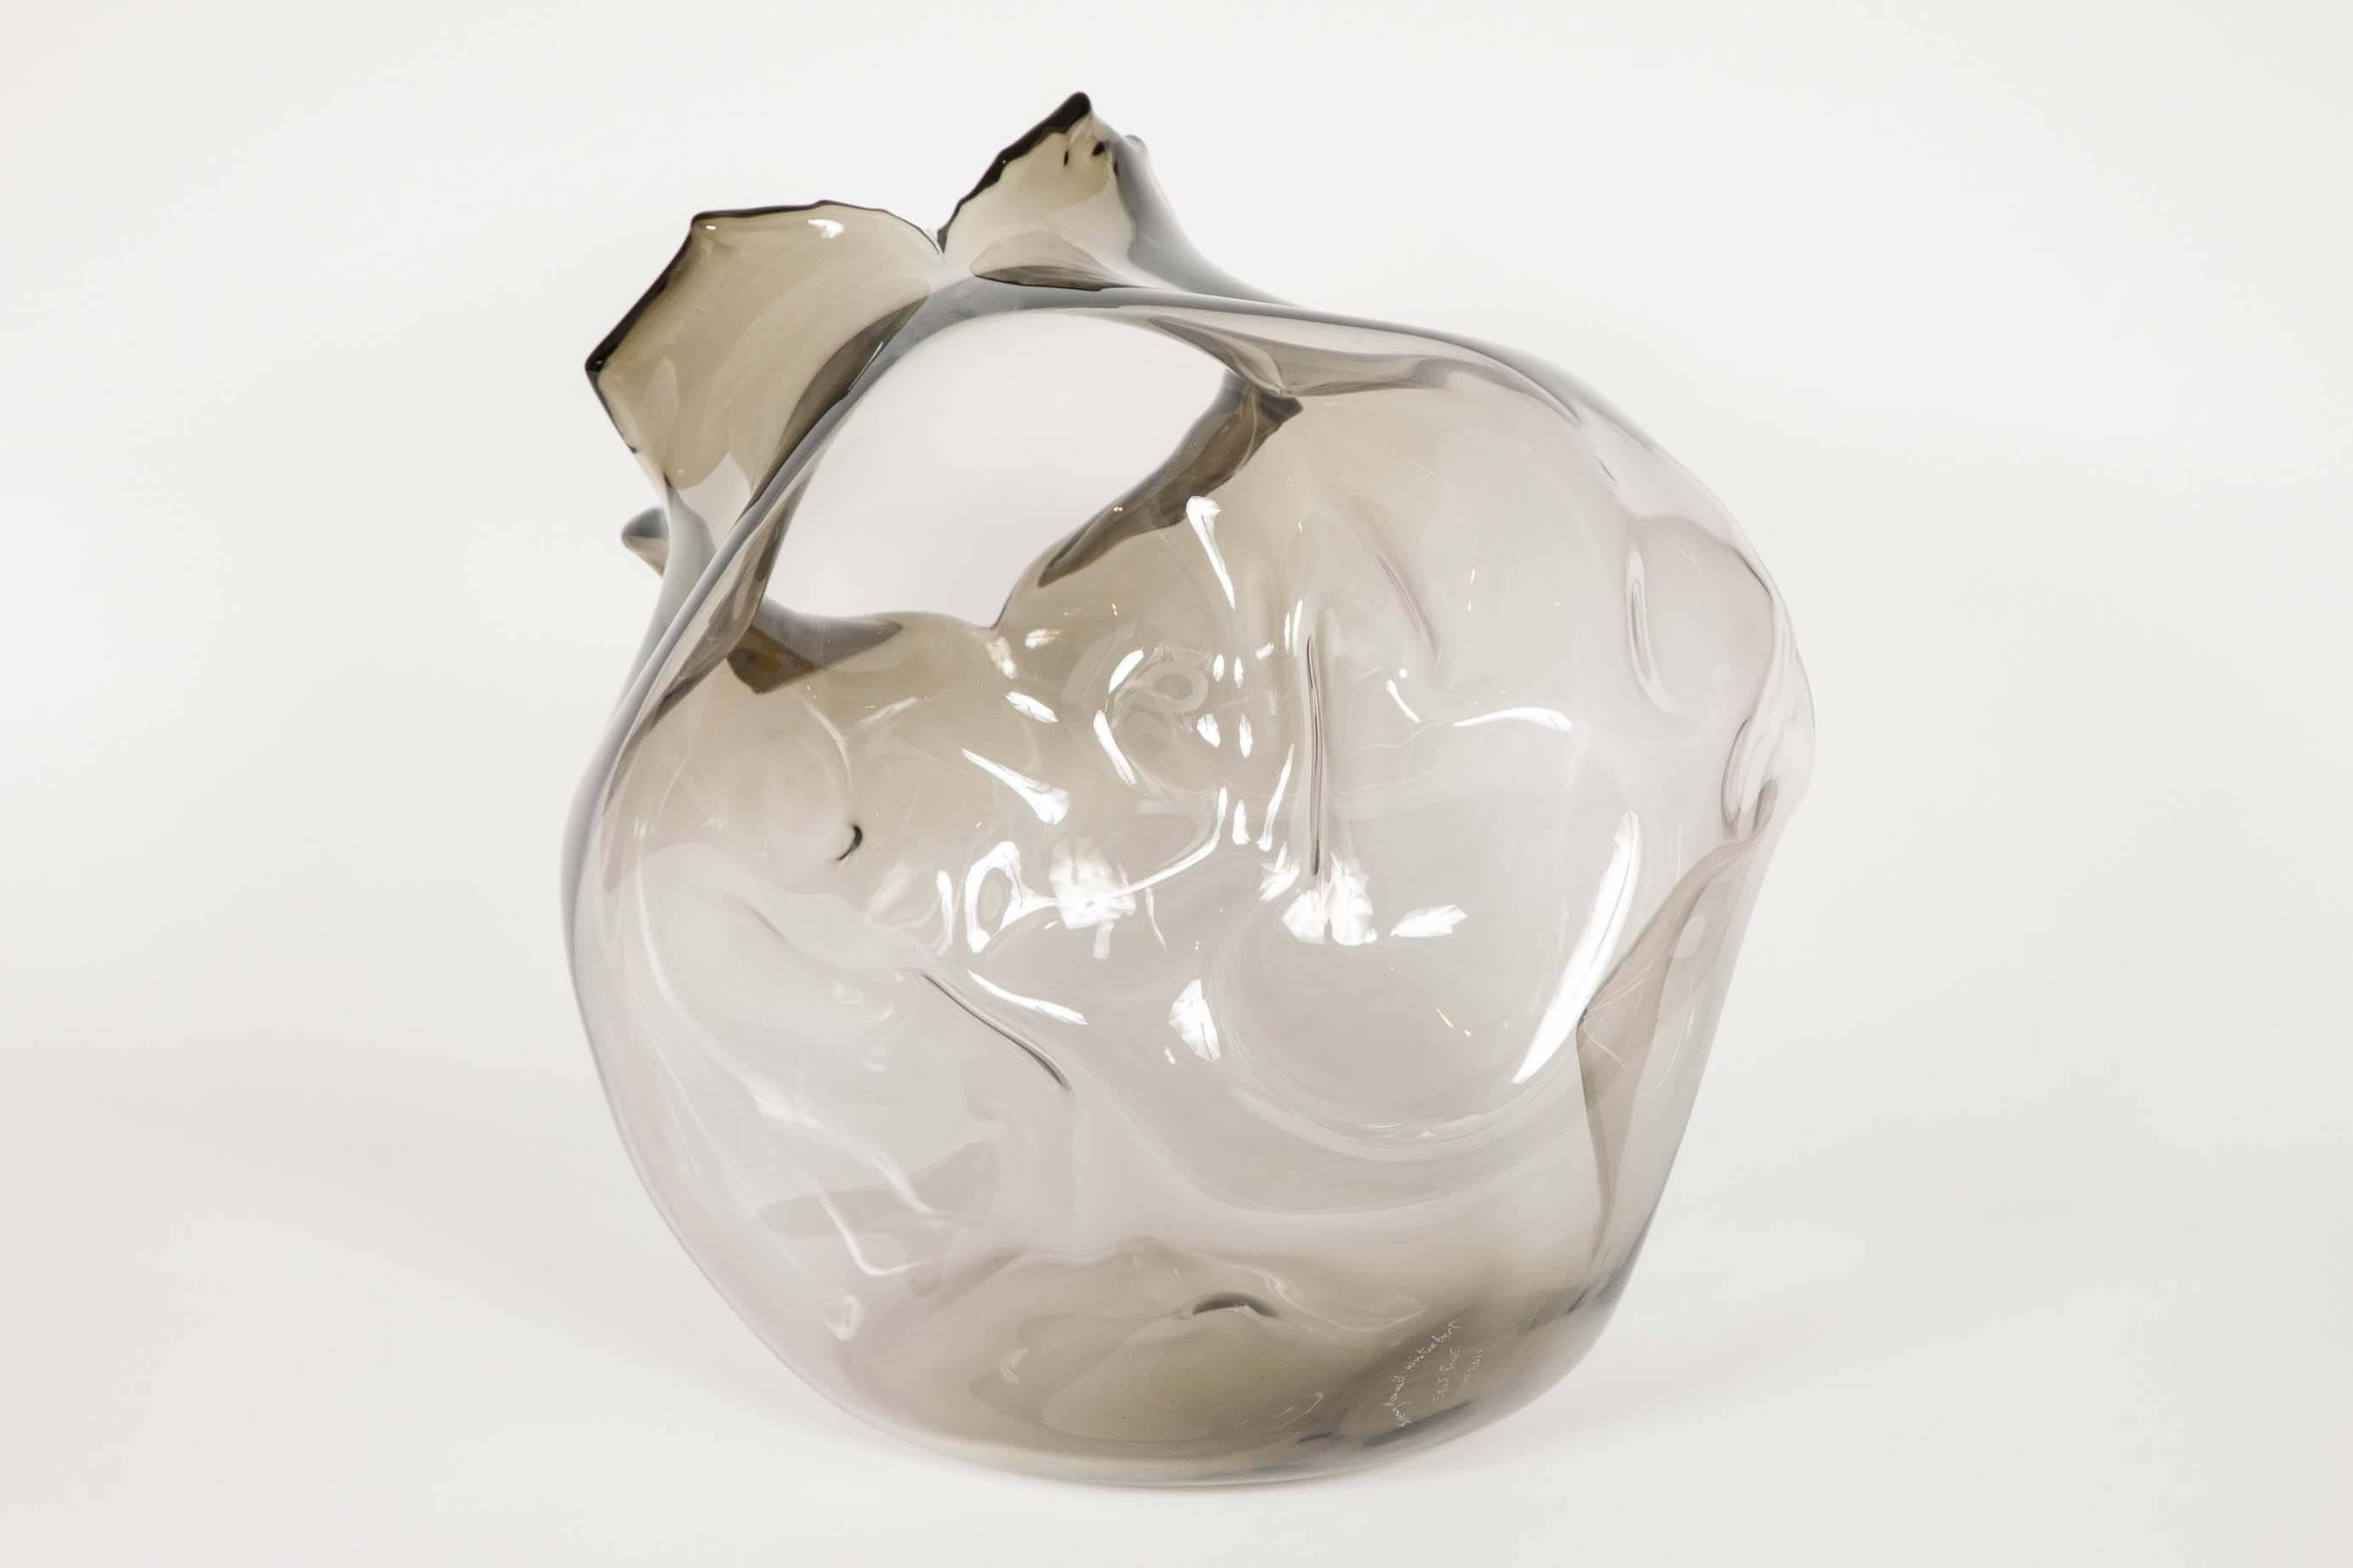 French Spirit Fruit in Bronze, a Unique Glass Sculpture by Jeremy Maxwell Wintrebert